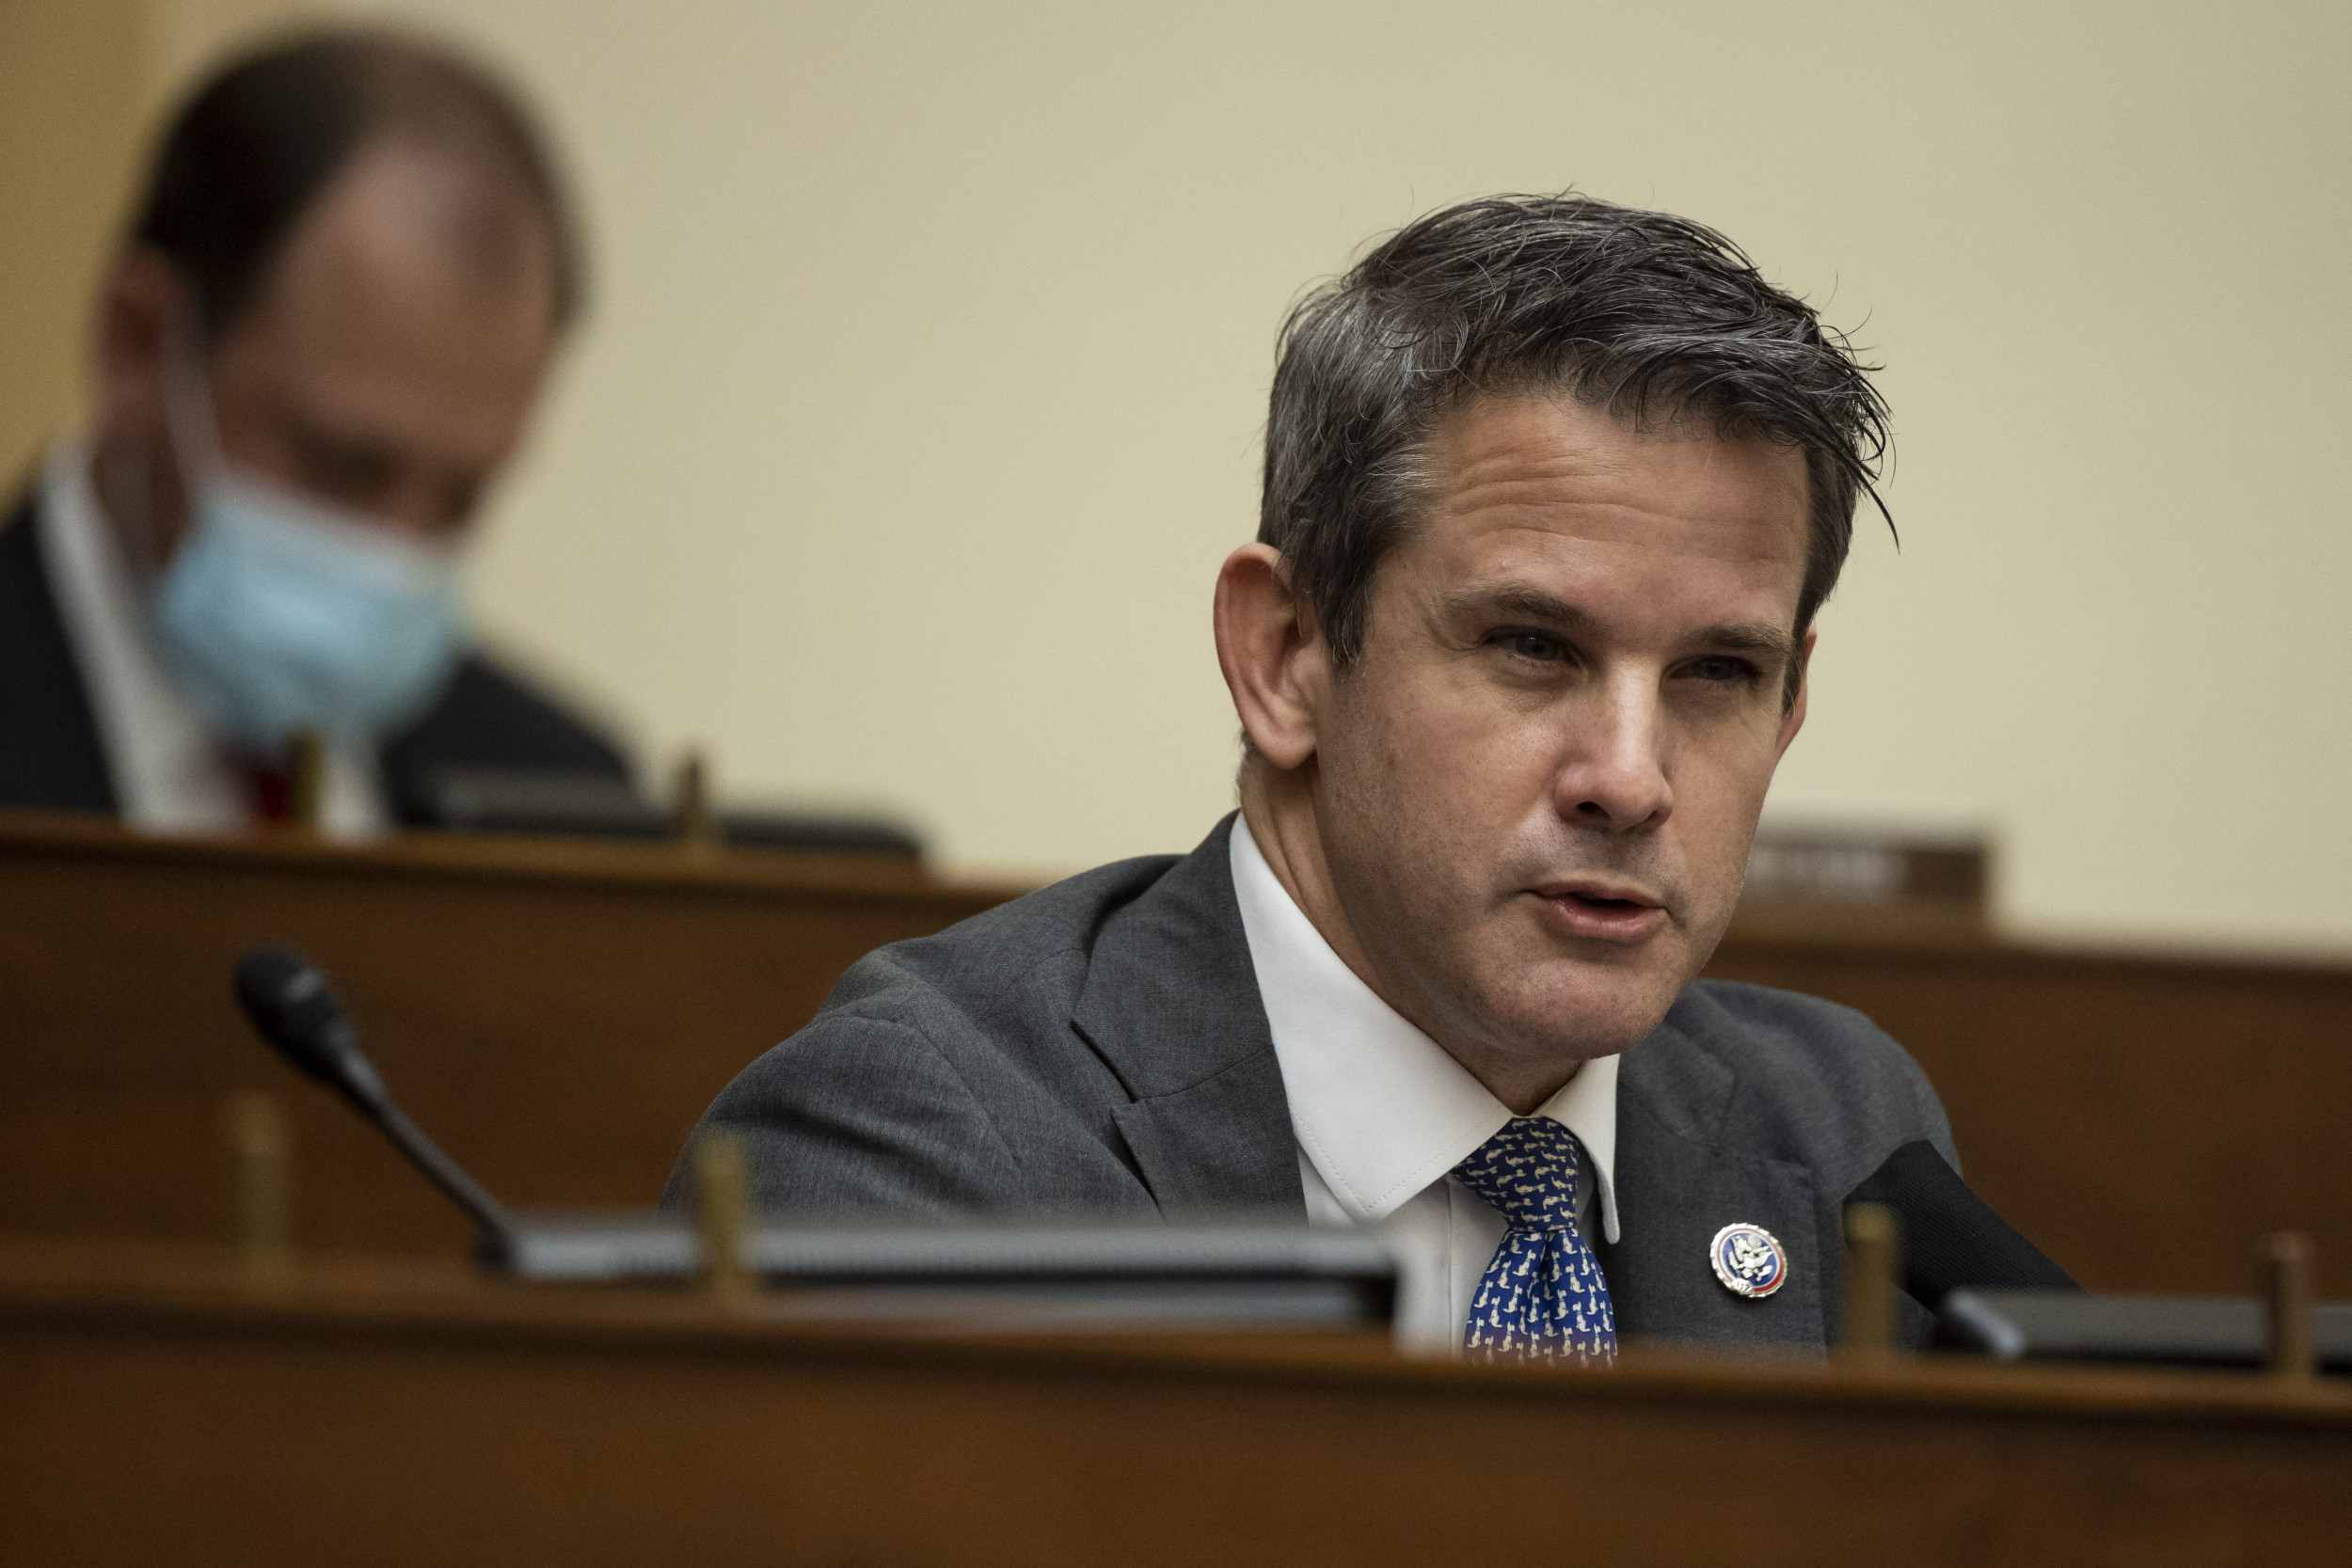 Republican MP Adam Kinzinger accuses Ron Johnson of trying to ‘rewrite history’ with comments from the BLM